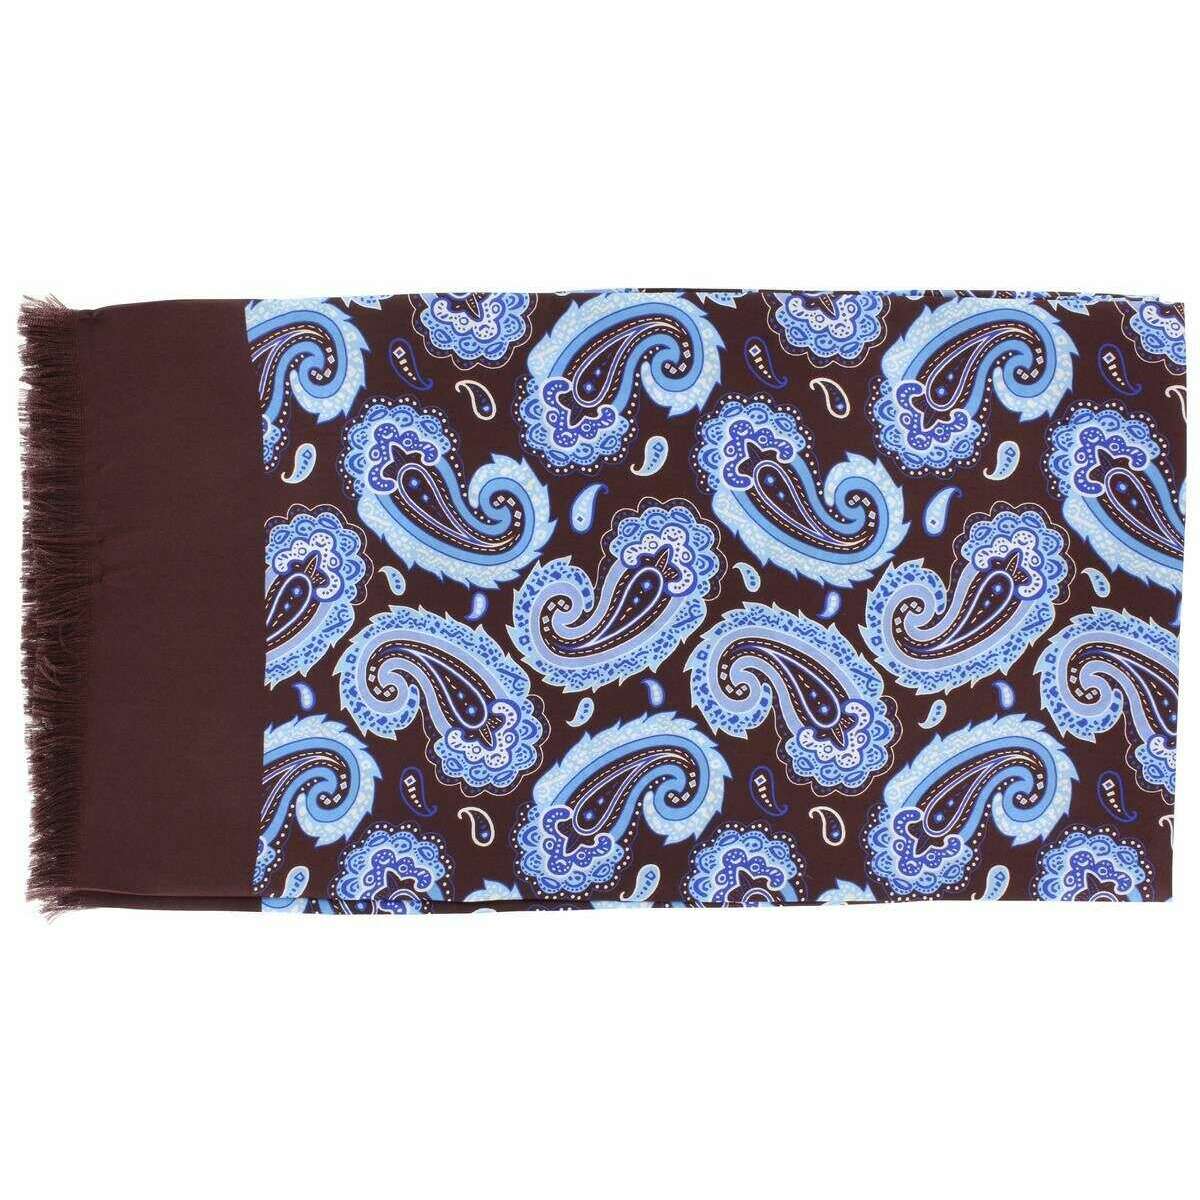 Michelsons of London Paisley Silk Scarf - Wine Red/Light Blue